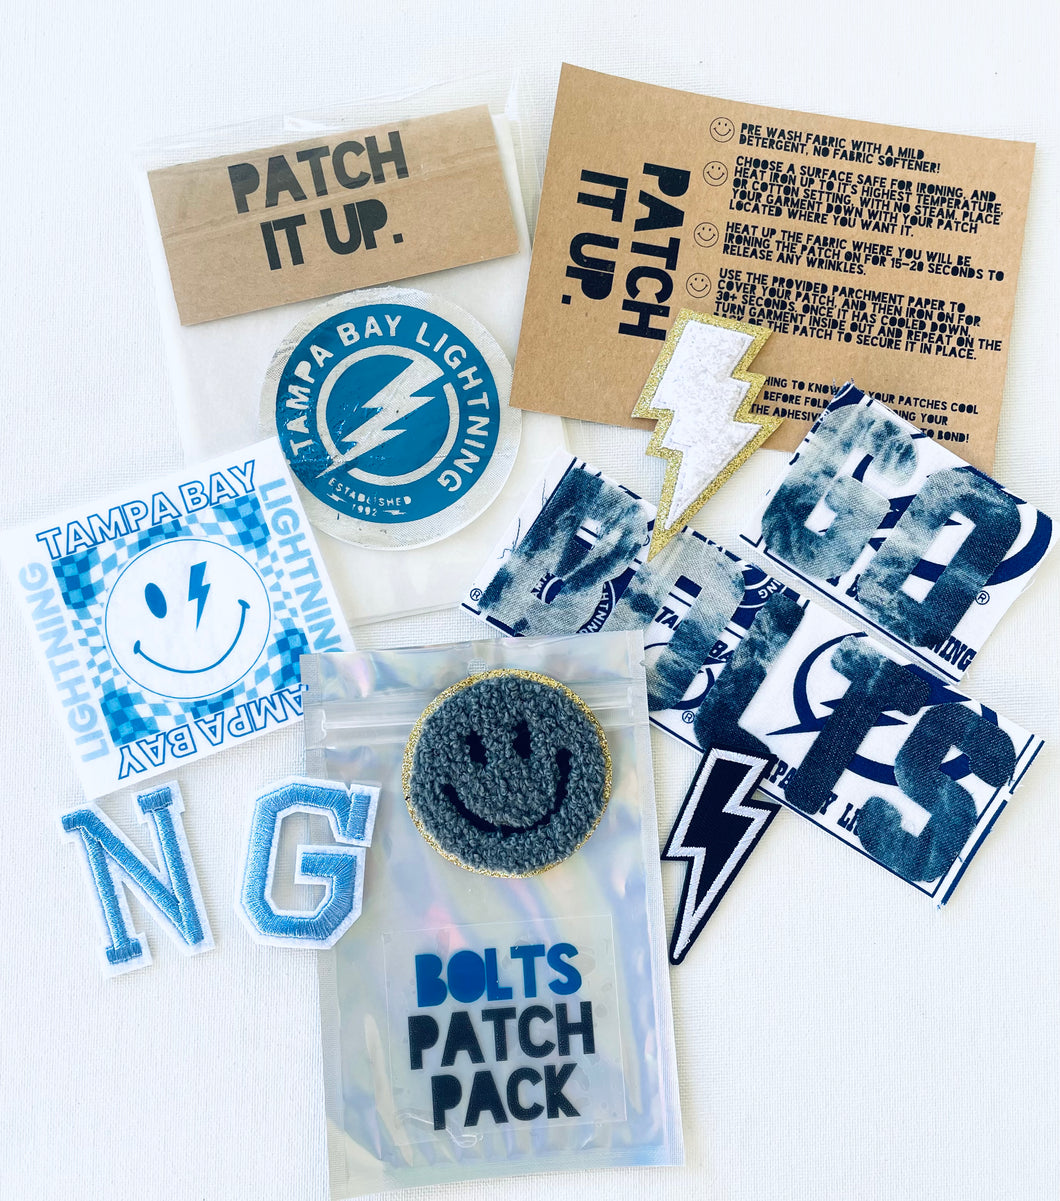 BOLTS PATCH PACK